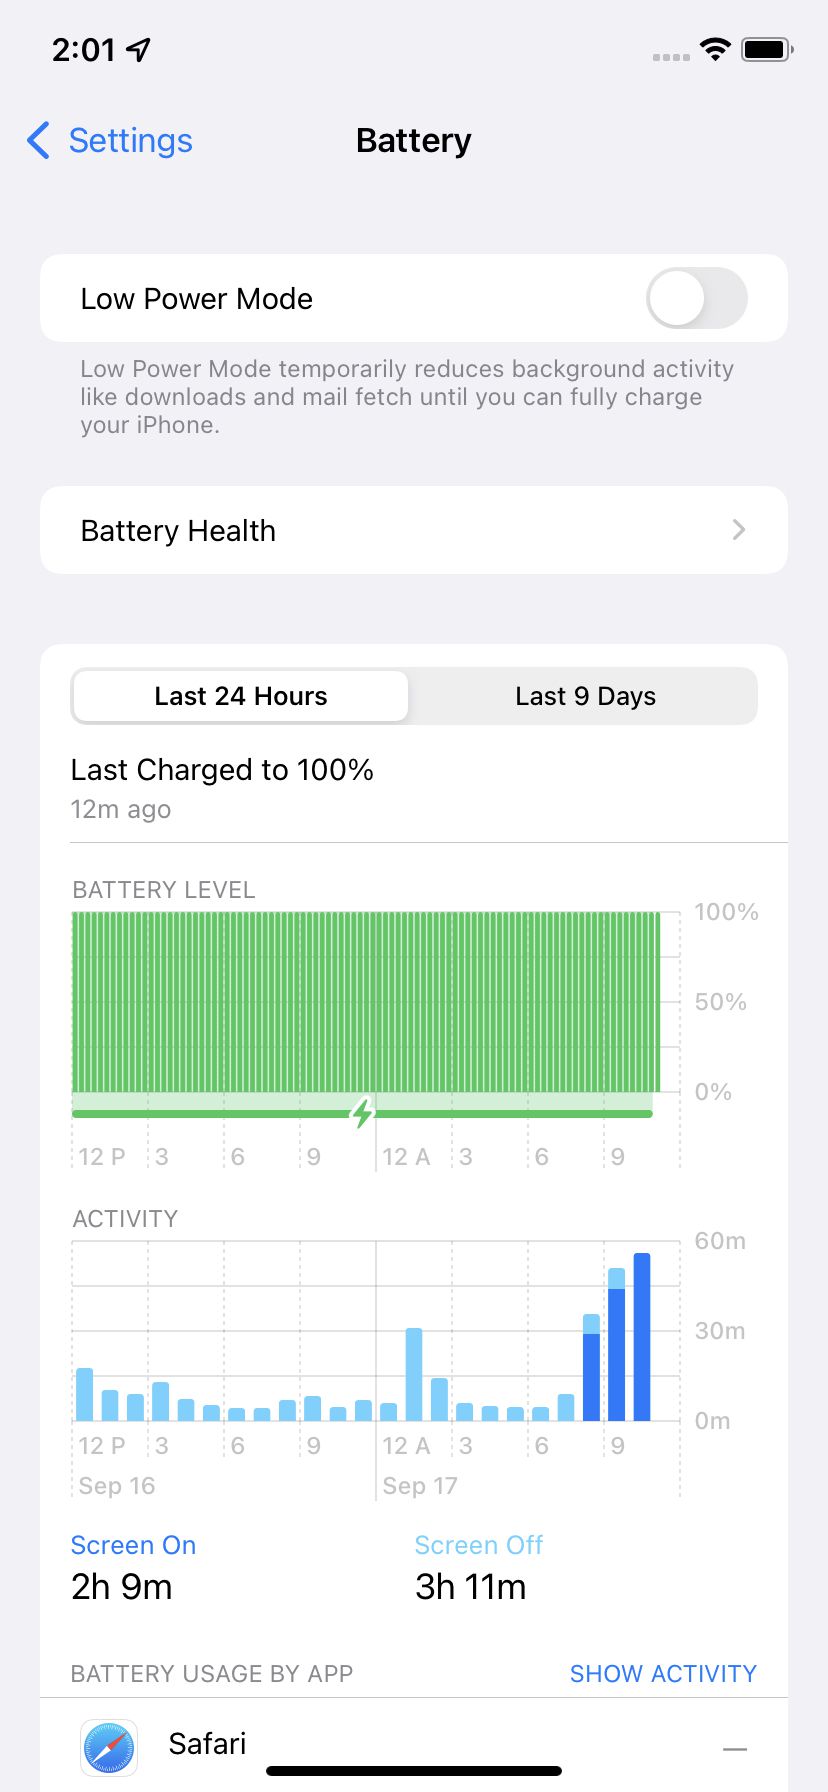 The “Battery” page in your iPhone’s settings has info about your battery usage.